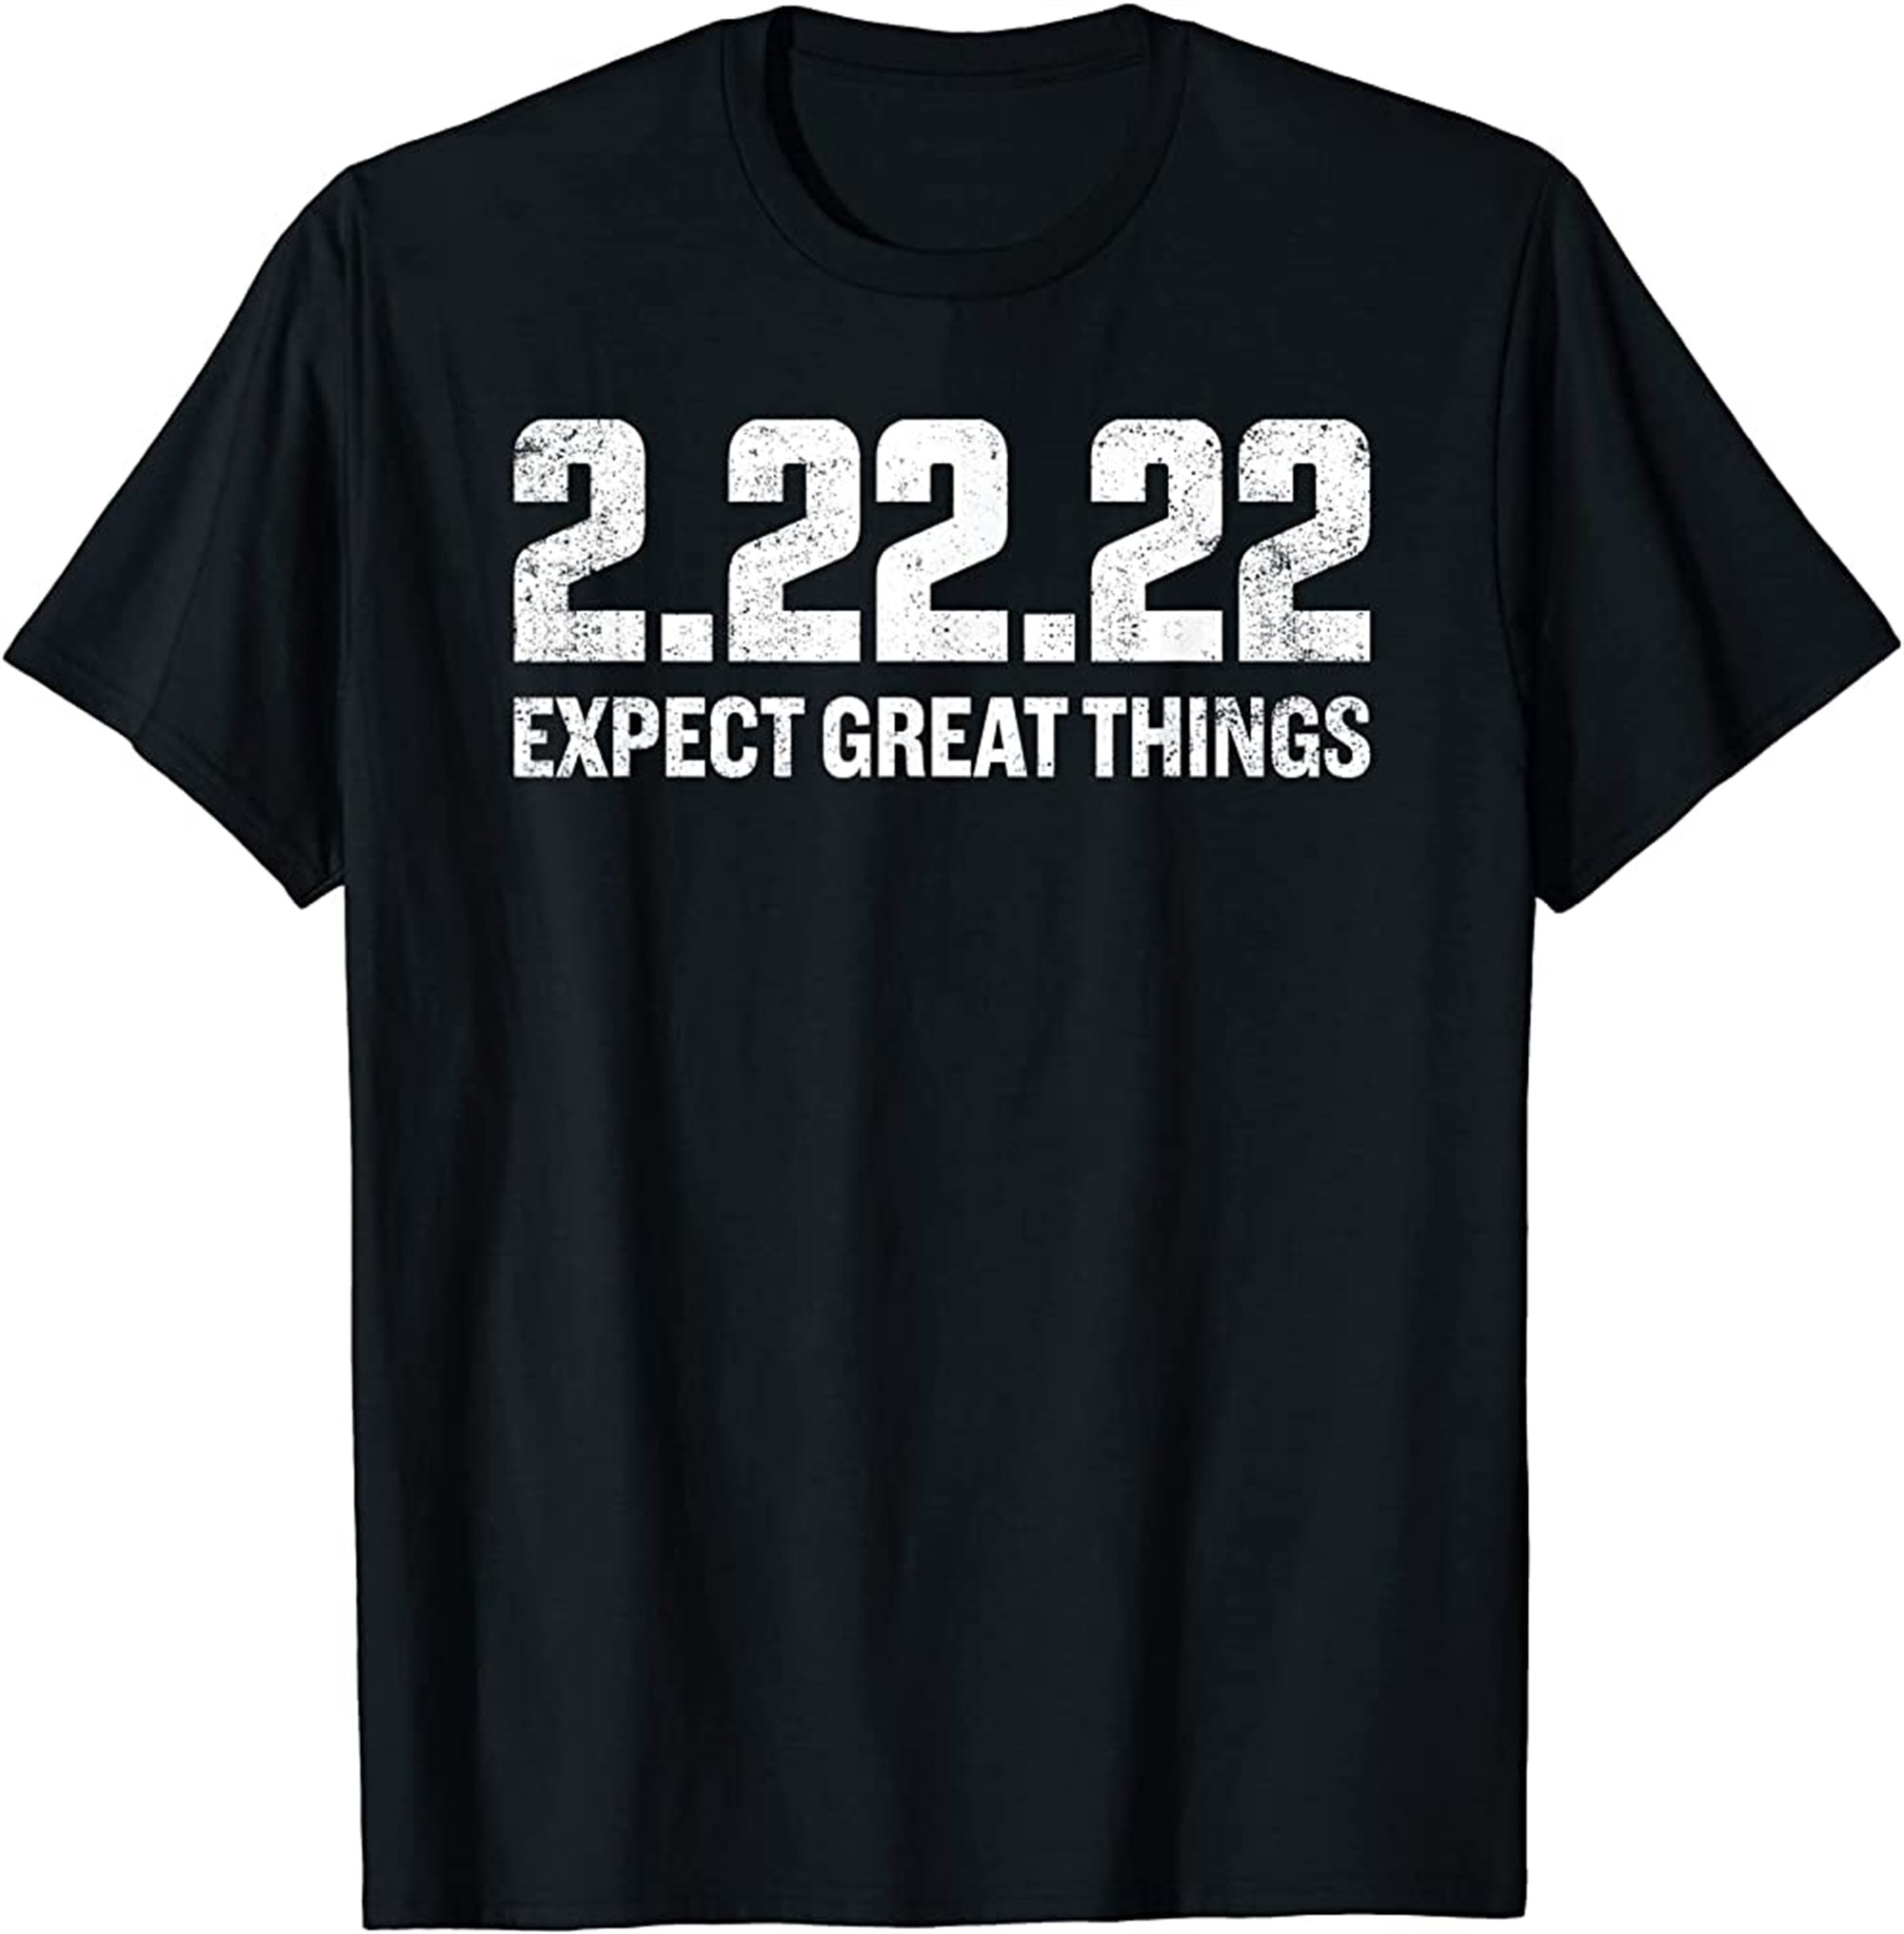 Expect Great Things Twosday 22222 Tuesday February 22 2022 T-shirt Plus Size Up To 5xl